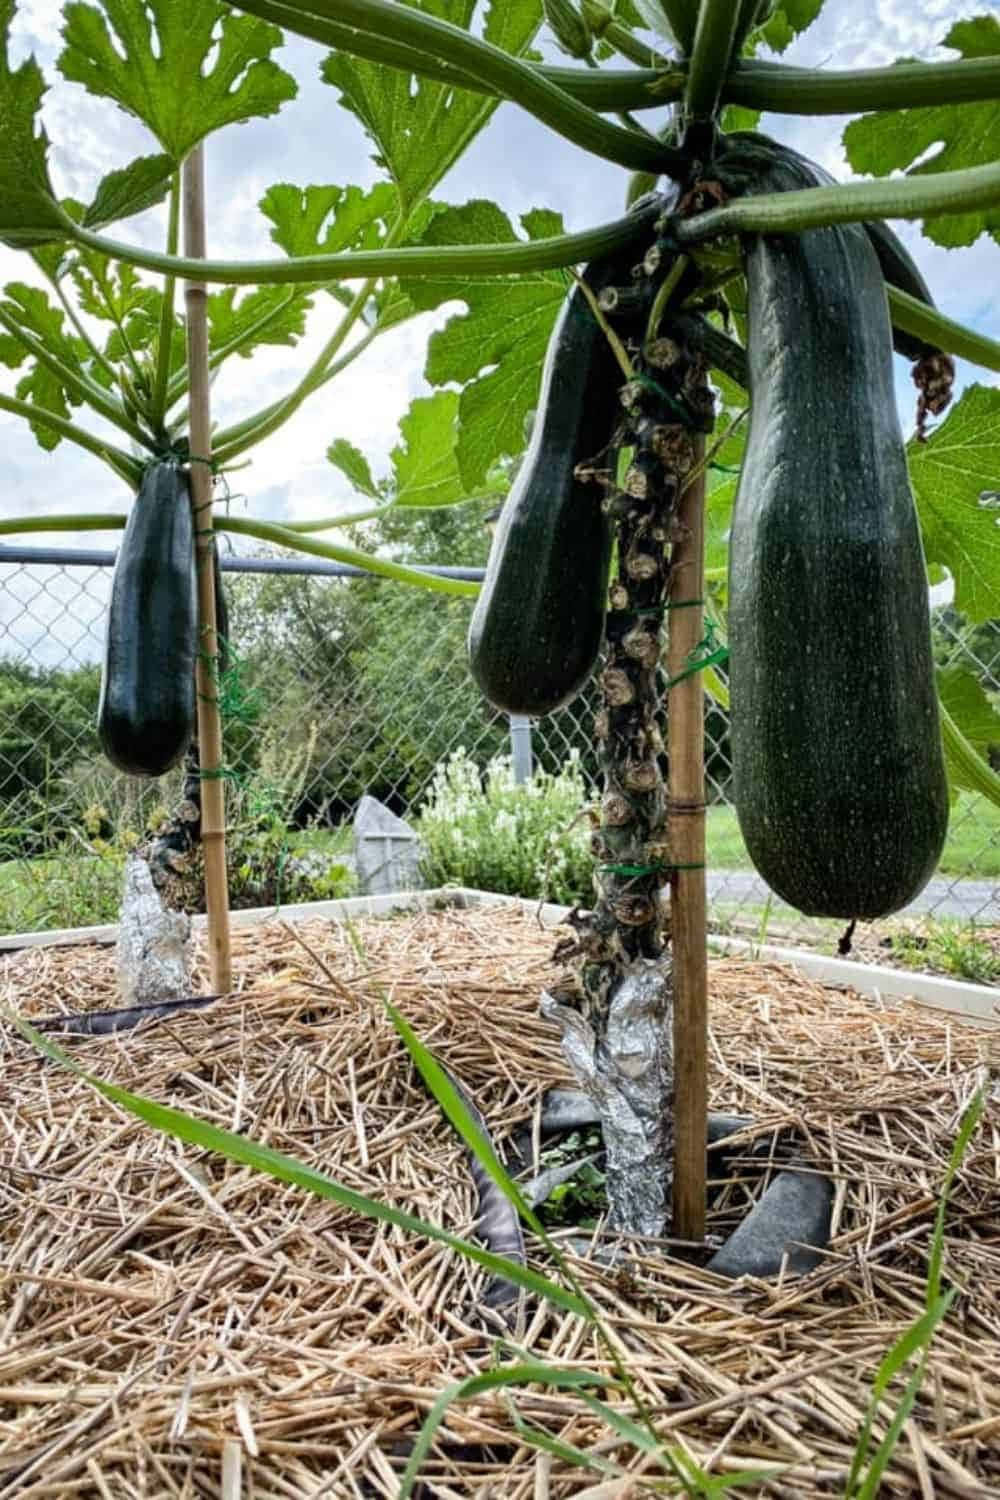 A Group Of Squash Plants Growing In A Garden